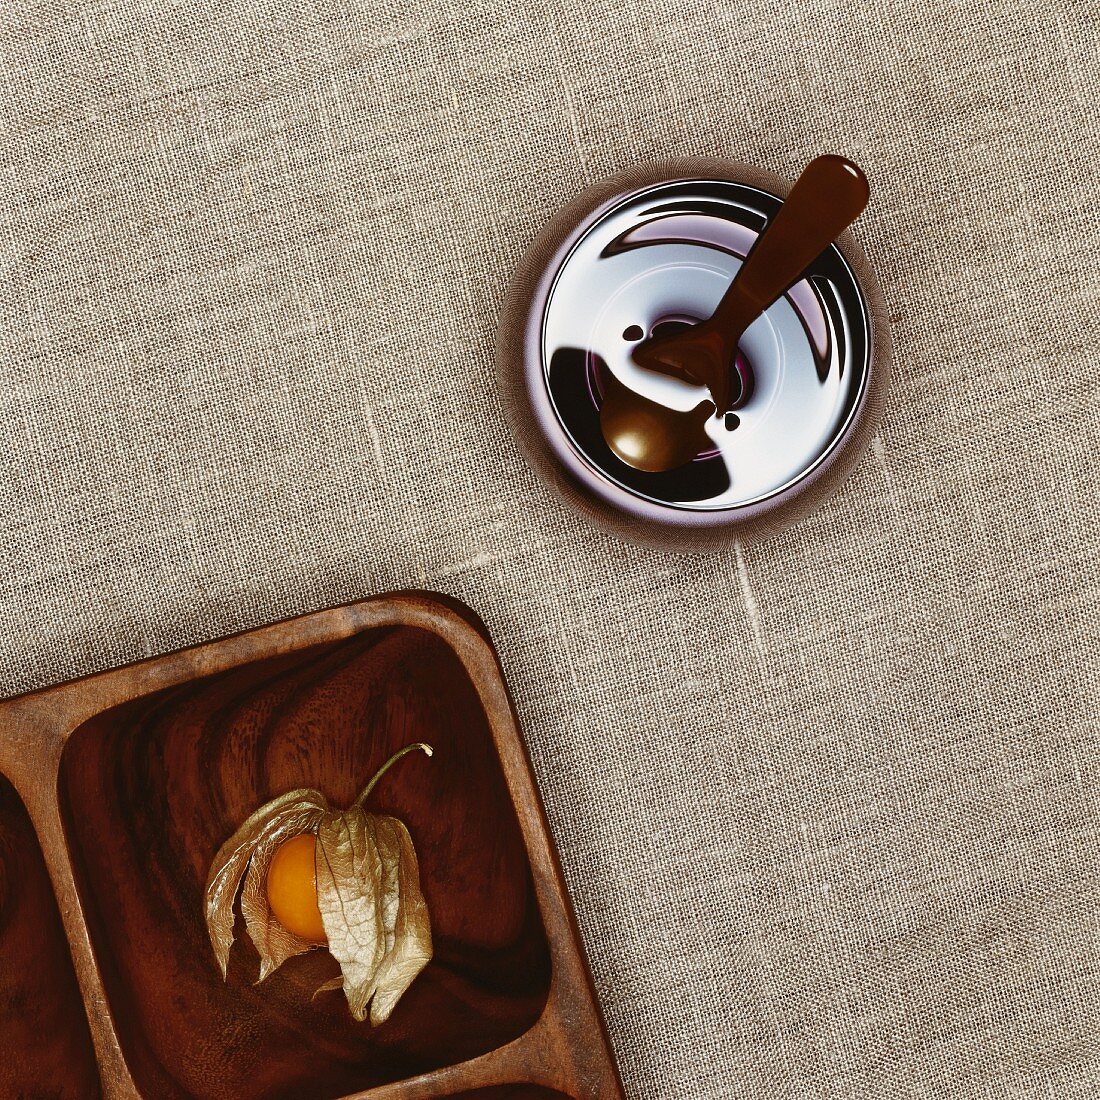 A physalis in a wooden dish and a glass of water